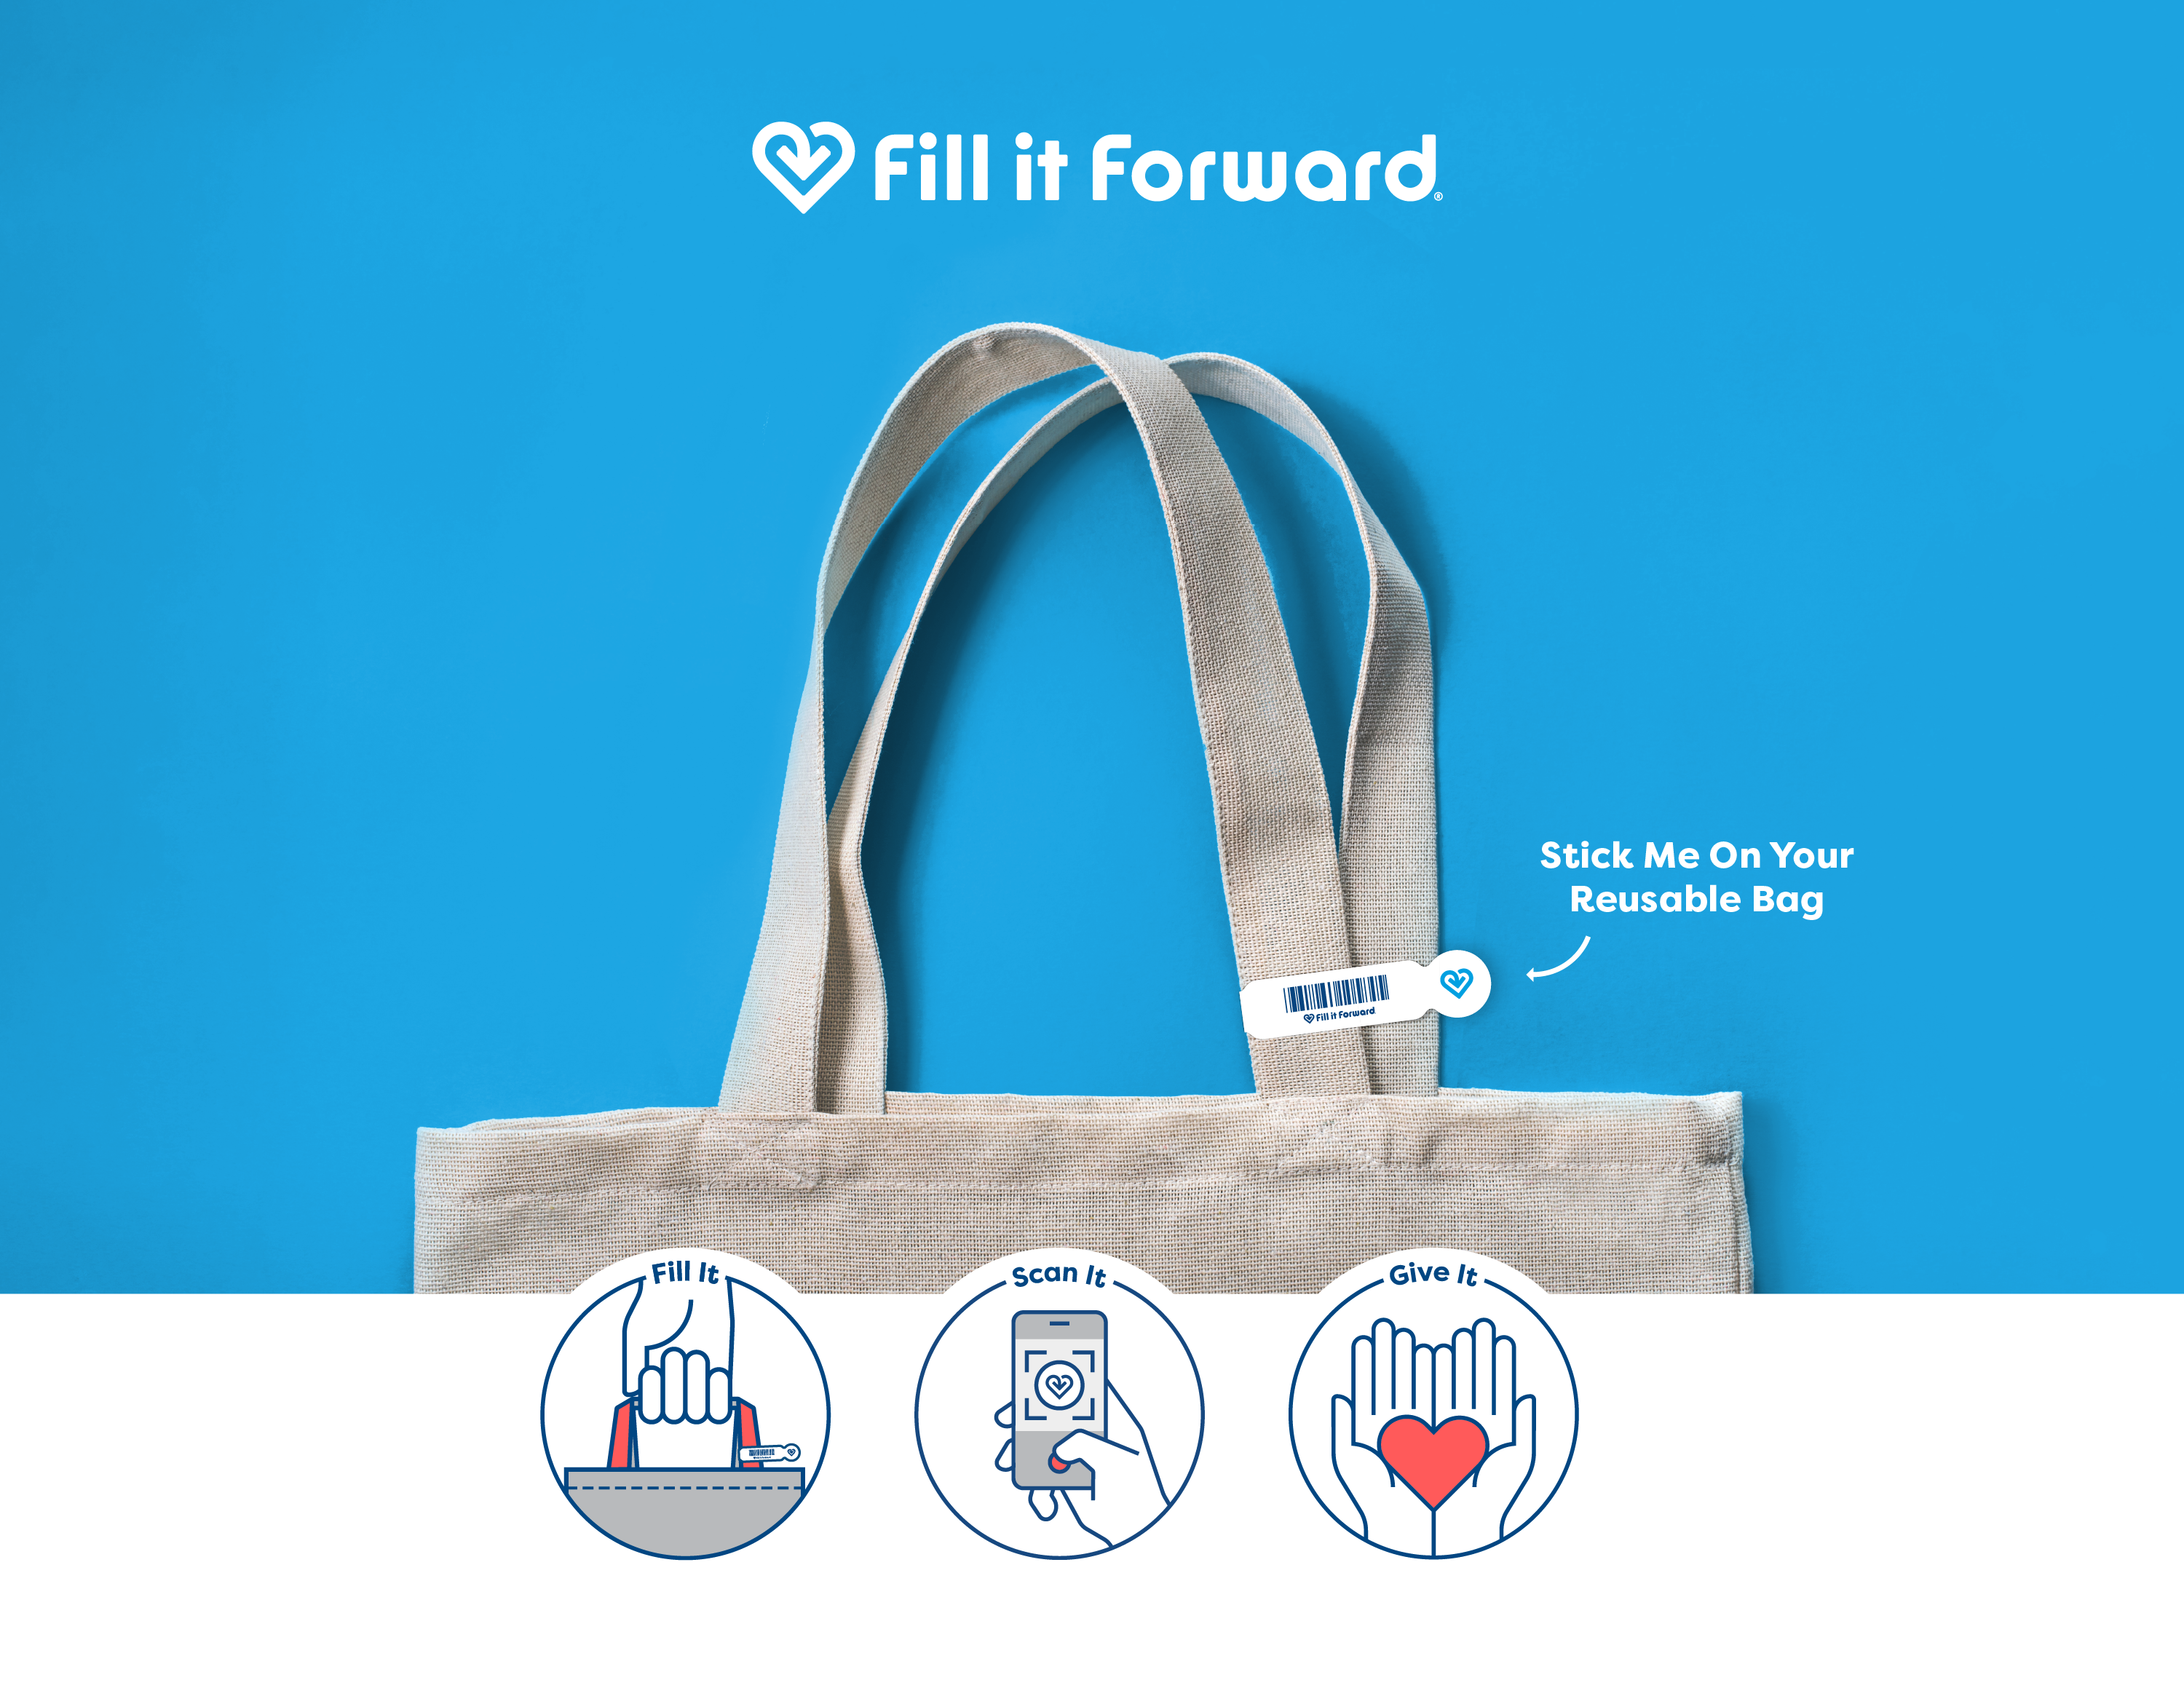 A cloth bag with a small white tag and barcode, with text pointing to the tag saying "Stick Me On Your Reusable Bag" and logo for Fill it Forward; at bottom, three illustrations